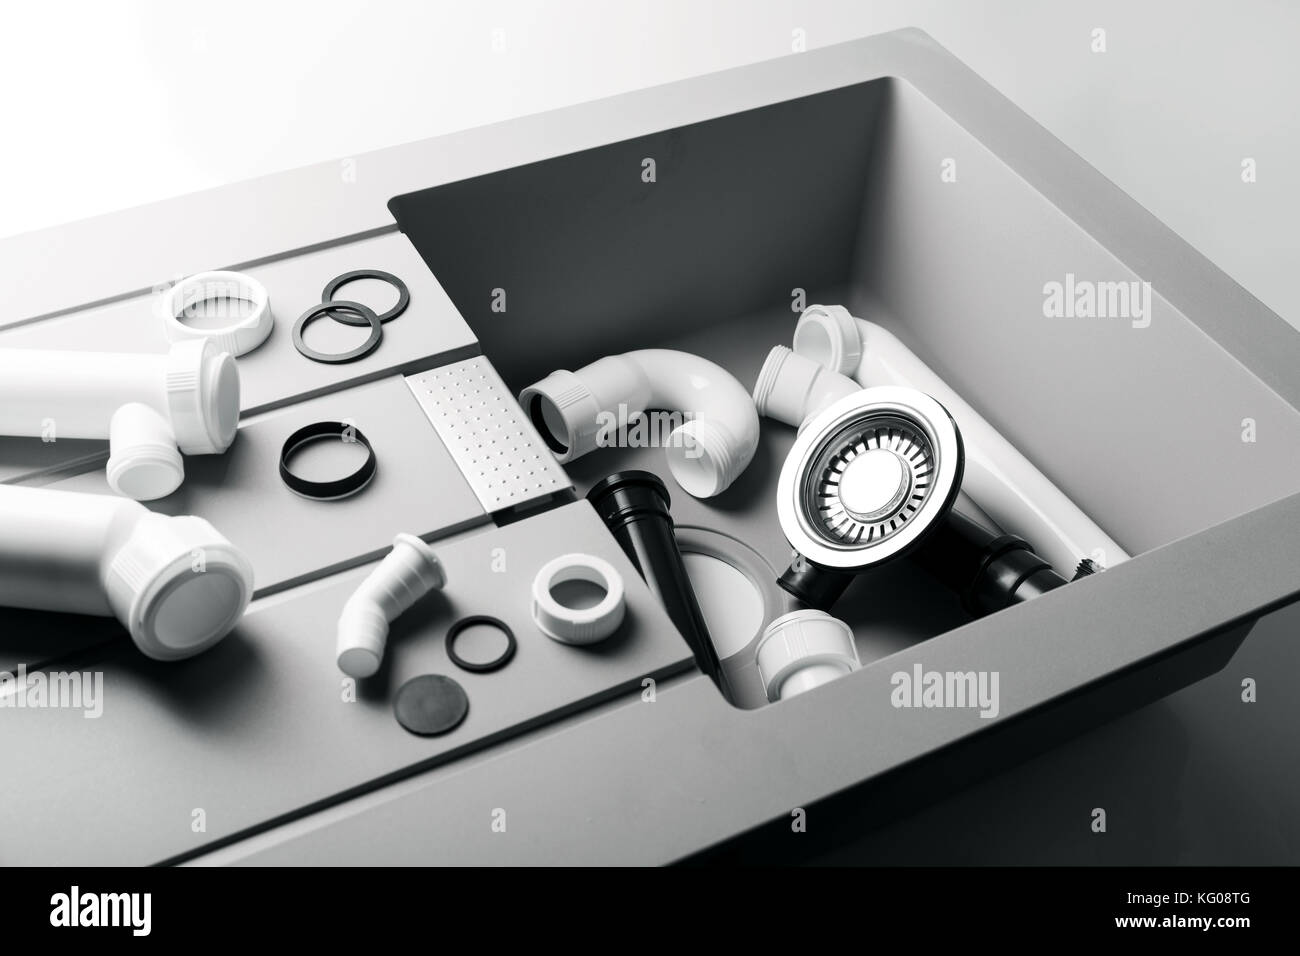 new kitchen sink with plumbing fittings Stock Photo